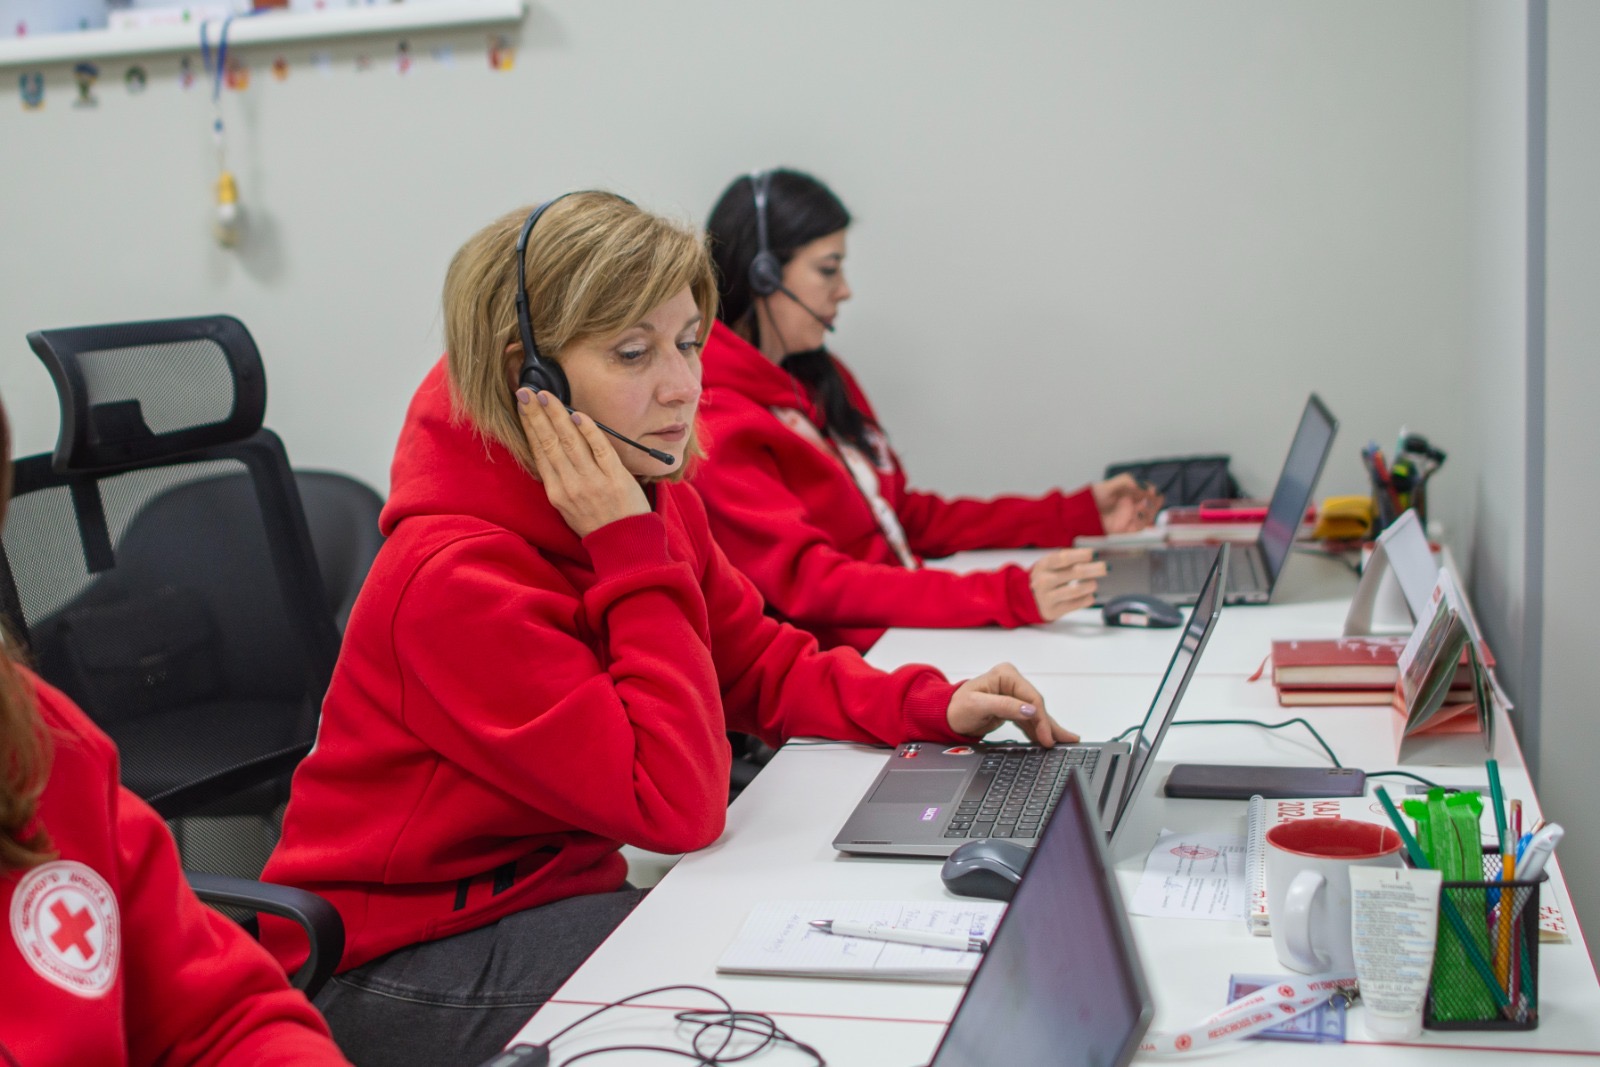 The Ukrainian Red Cross Provides Individual Counselling on Employment